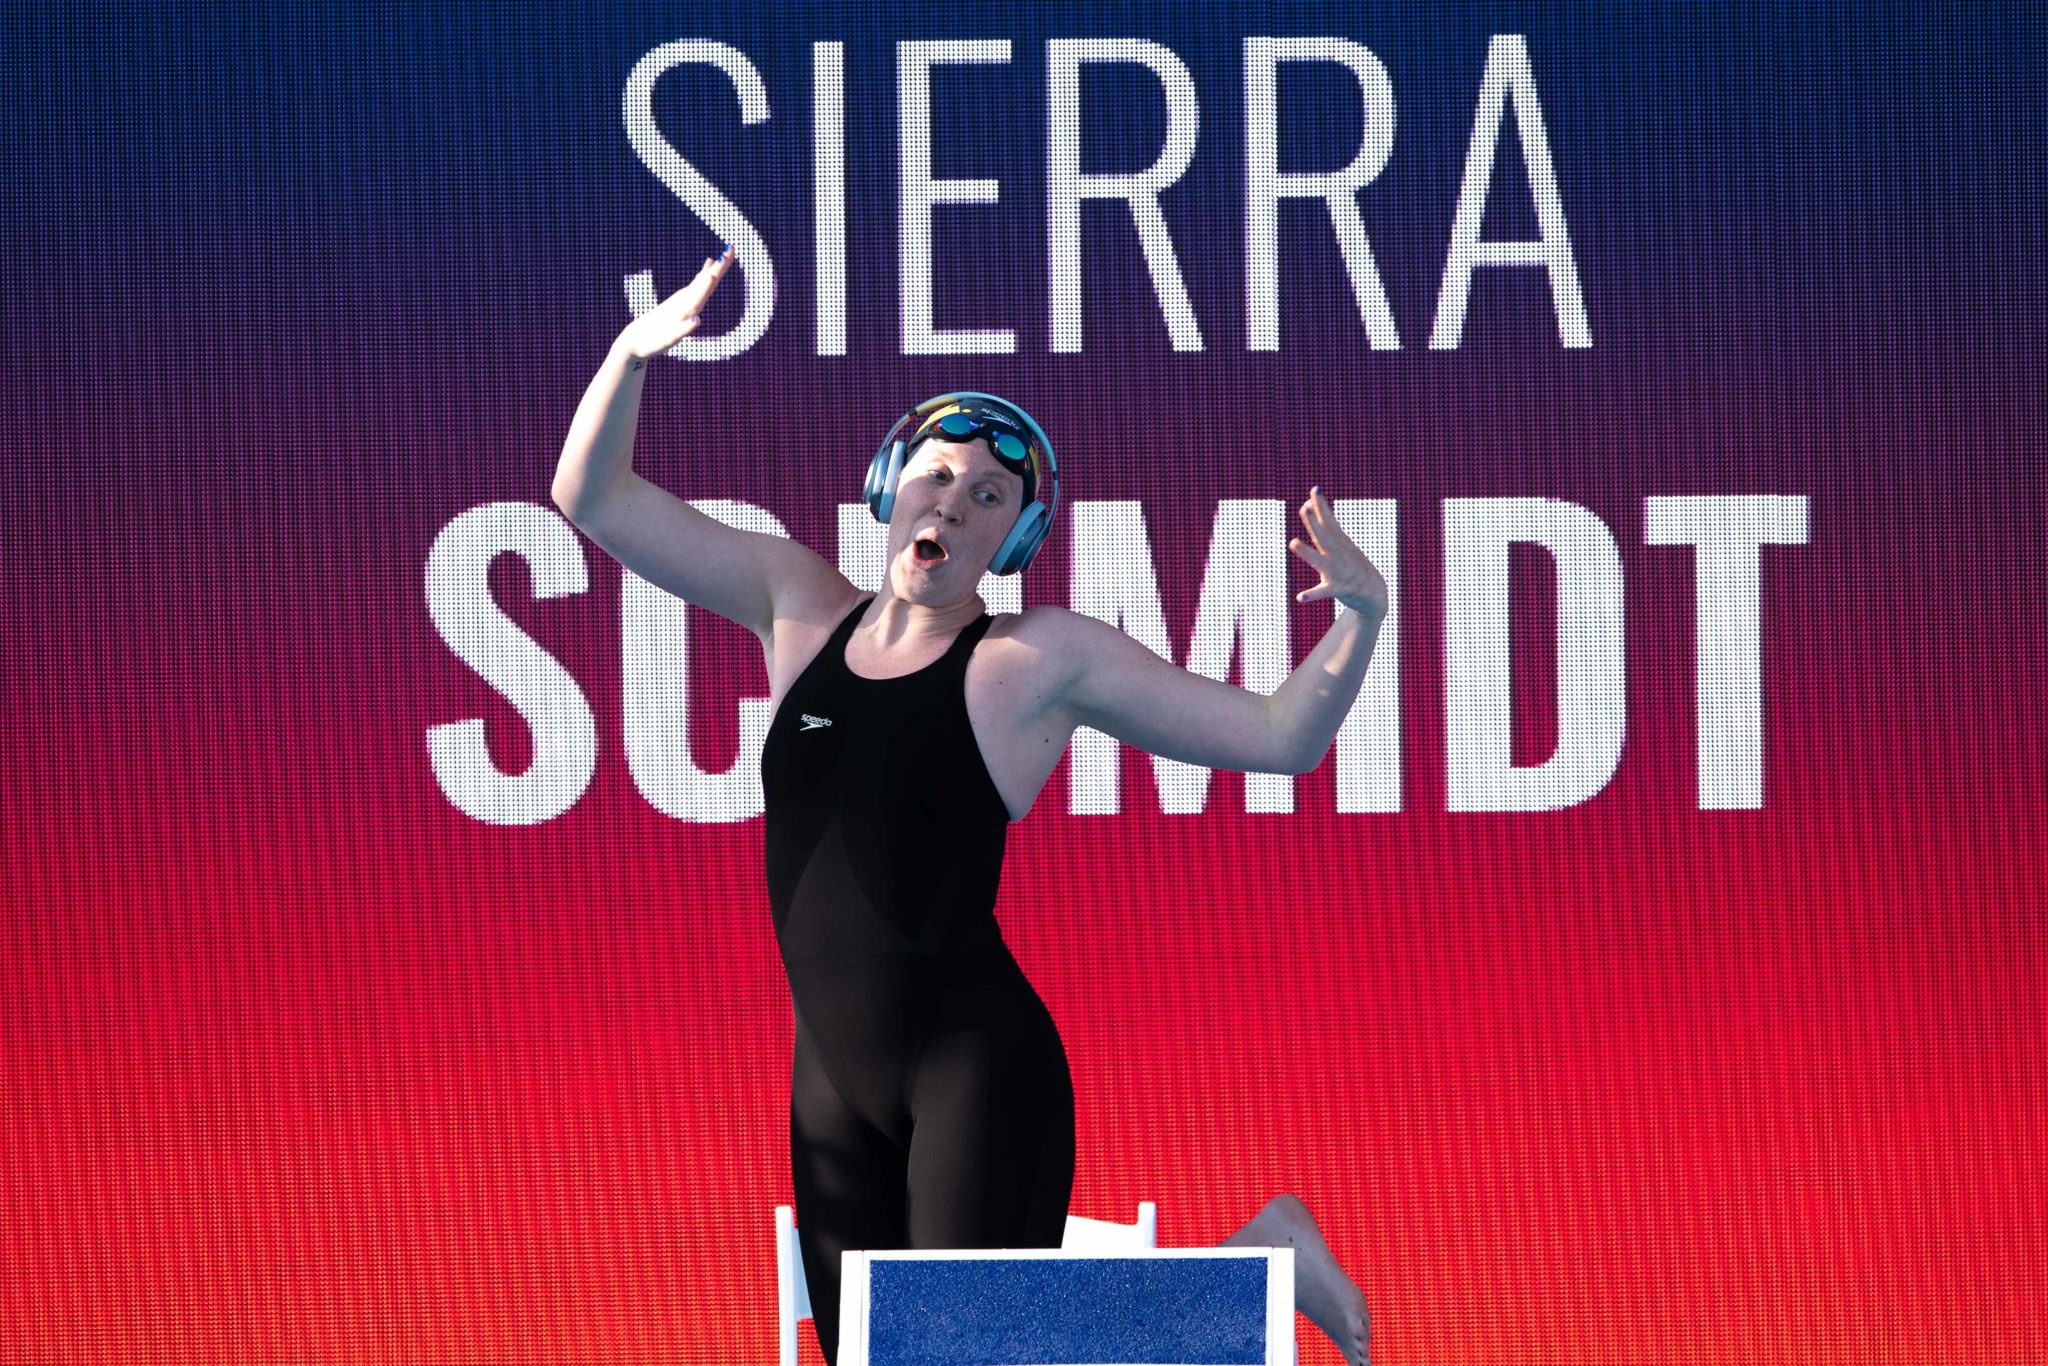  Sierra Schmidt Moving to Arizona, Will Train Under Father Until Olympic Trials 